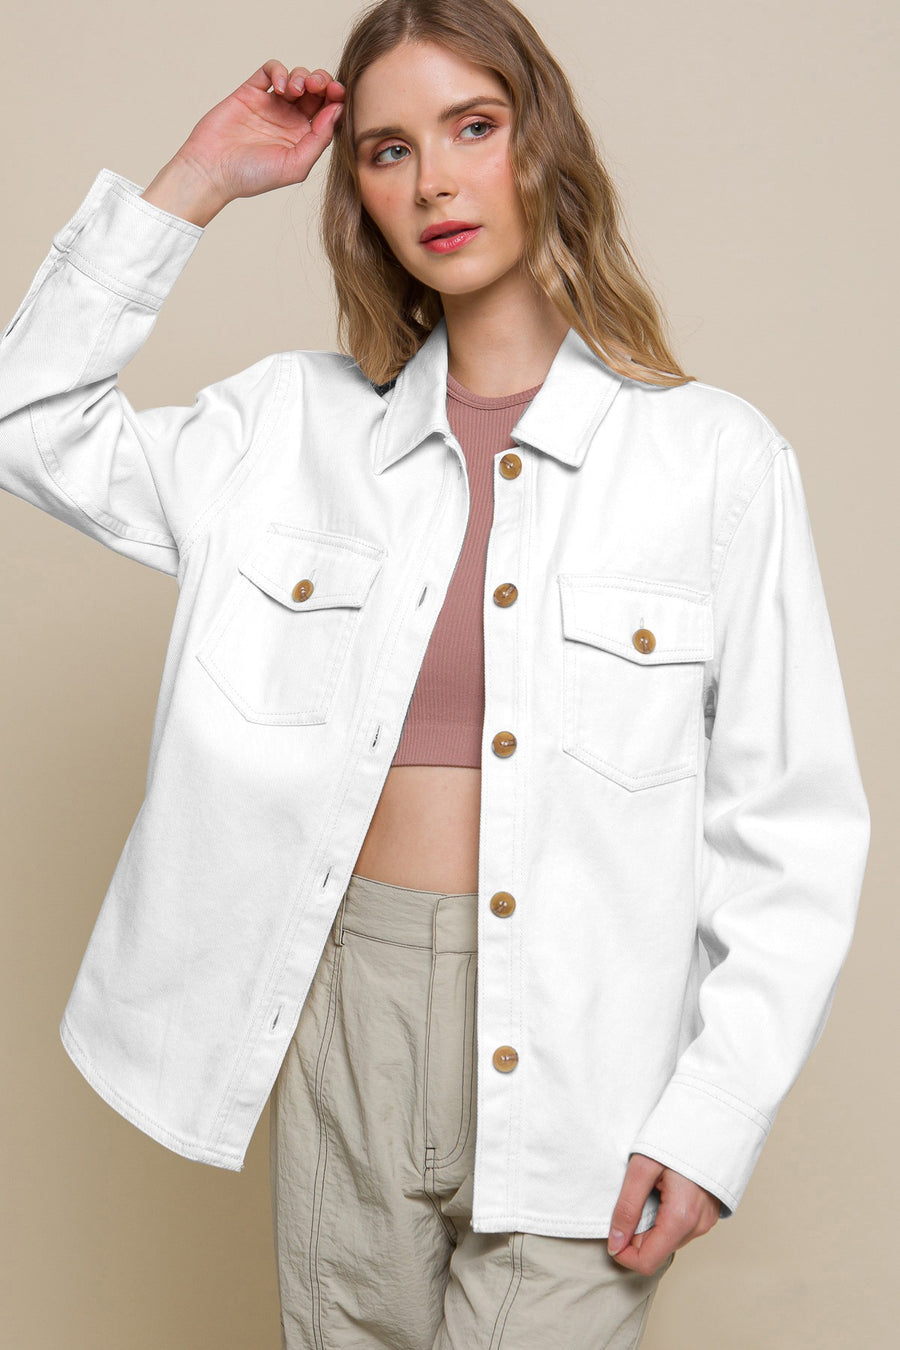 Featuring a longsleeve button up jacket with two front pockets in the color white 